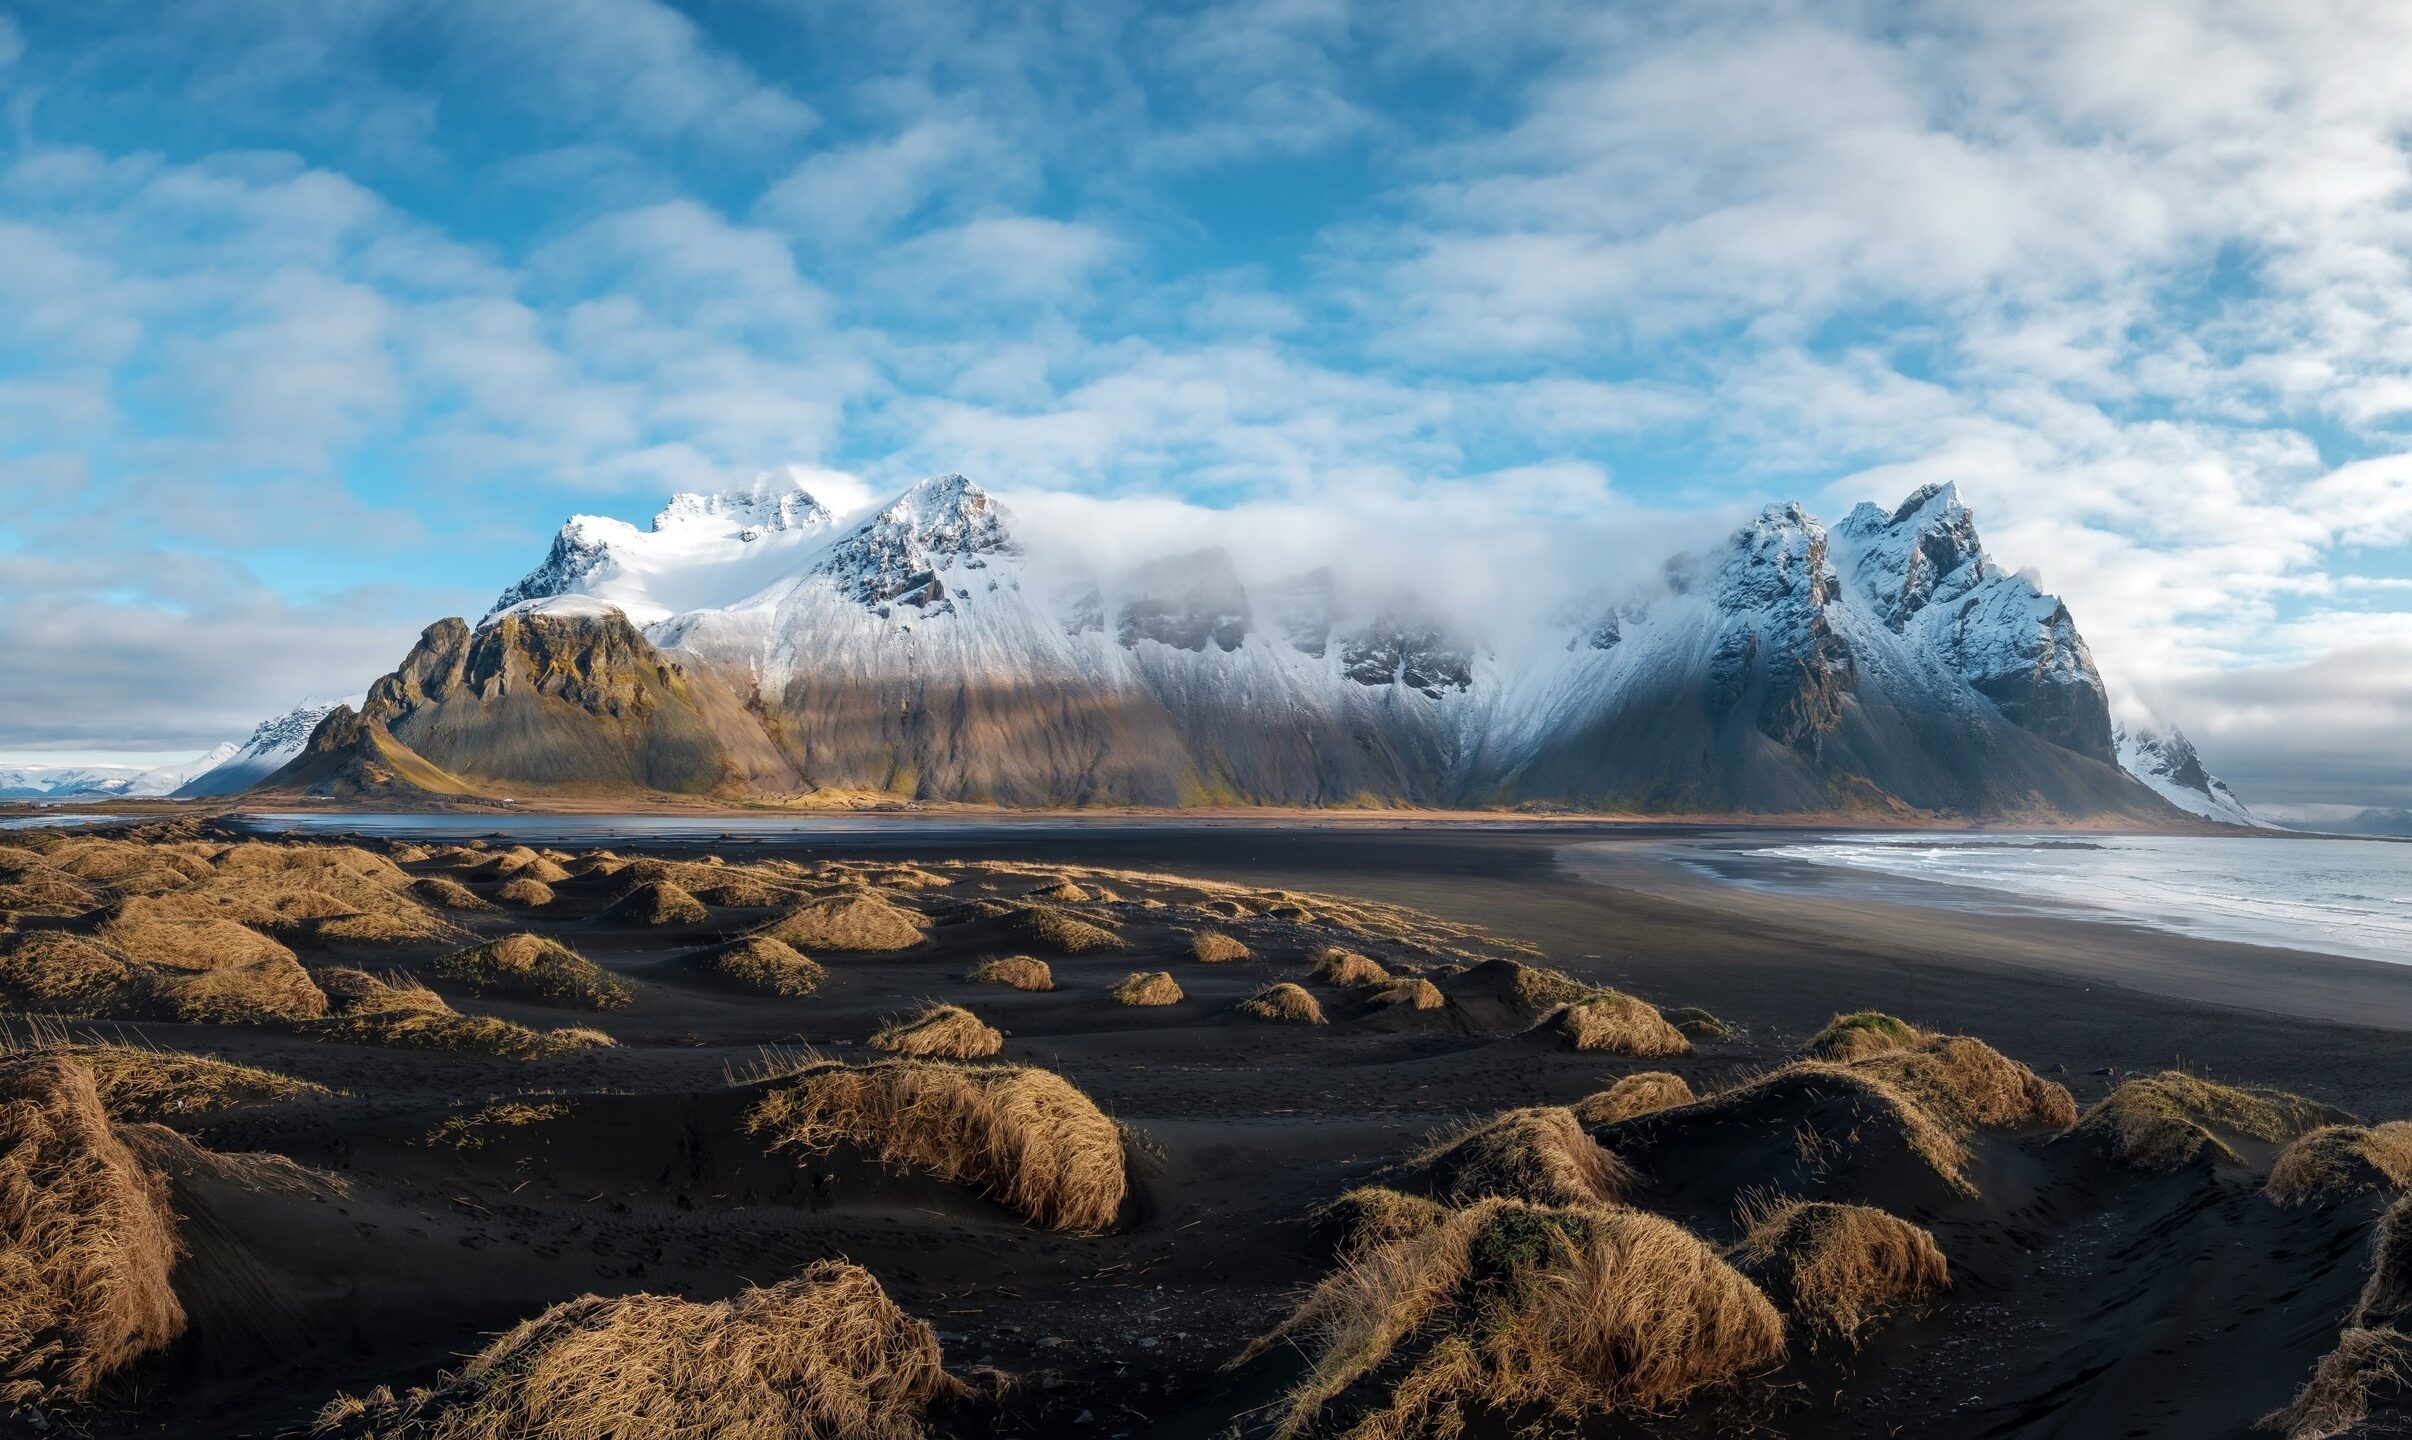 Non-stop flights from Toronto to Iceland on February-April for only C$640 round-trip including GST!